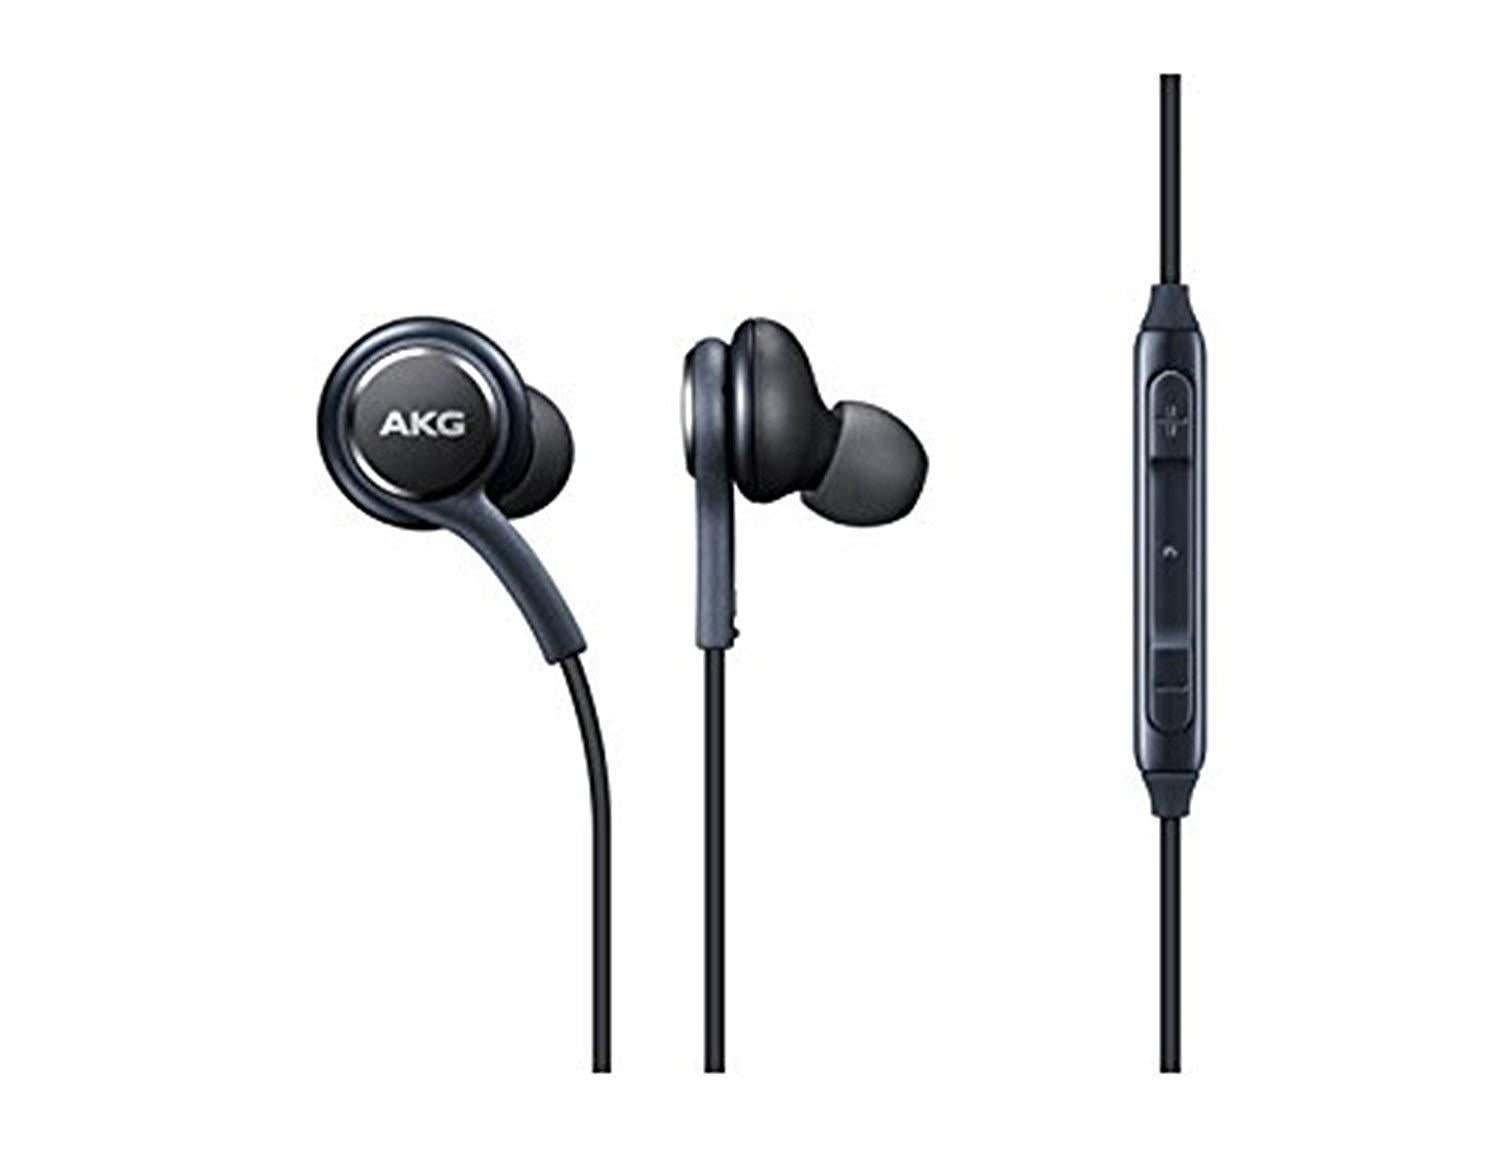 AKG Earbuds Earphone Headphones Headset Bass Stereo For Samsung Galaxy S9 S8 S8 